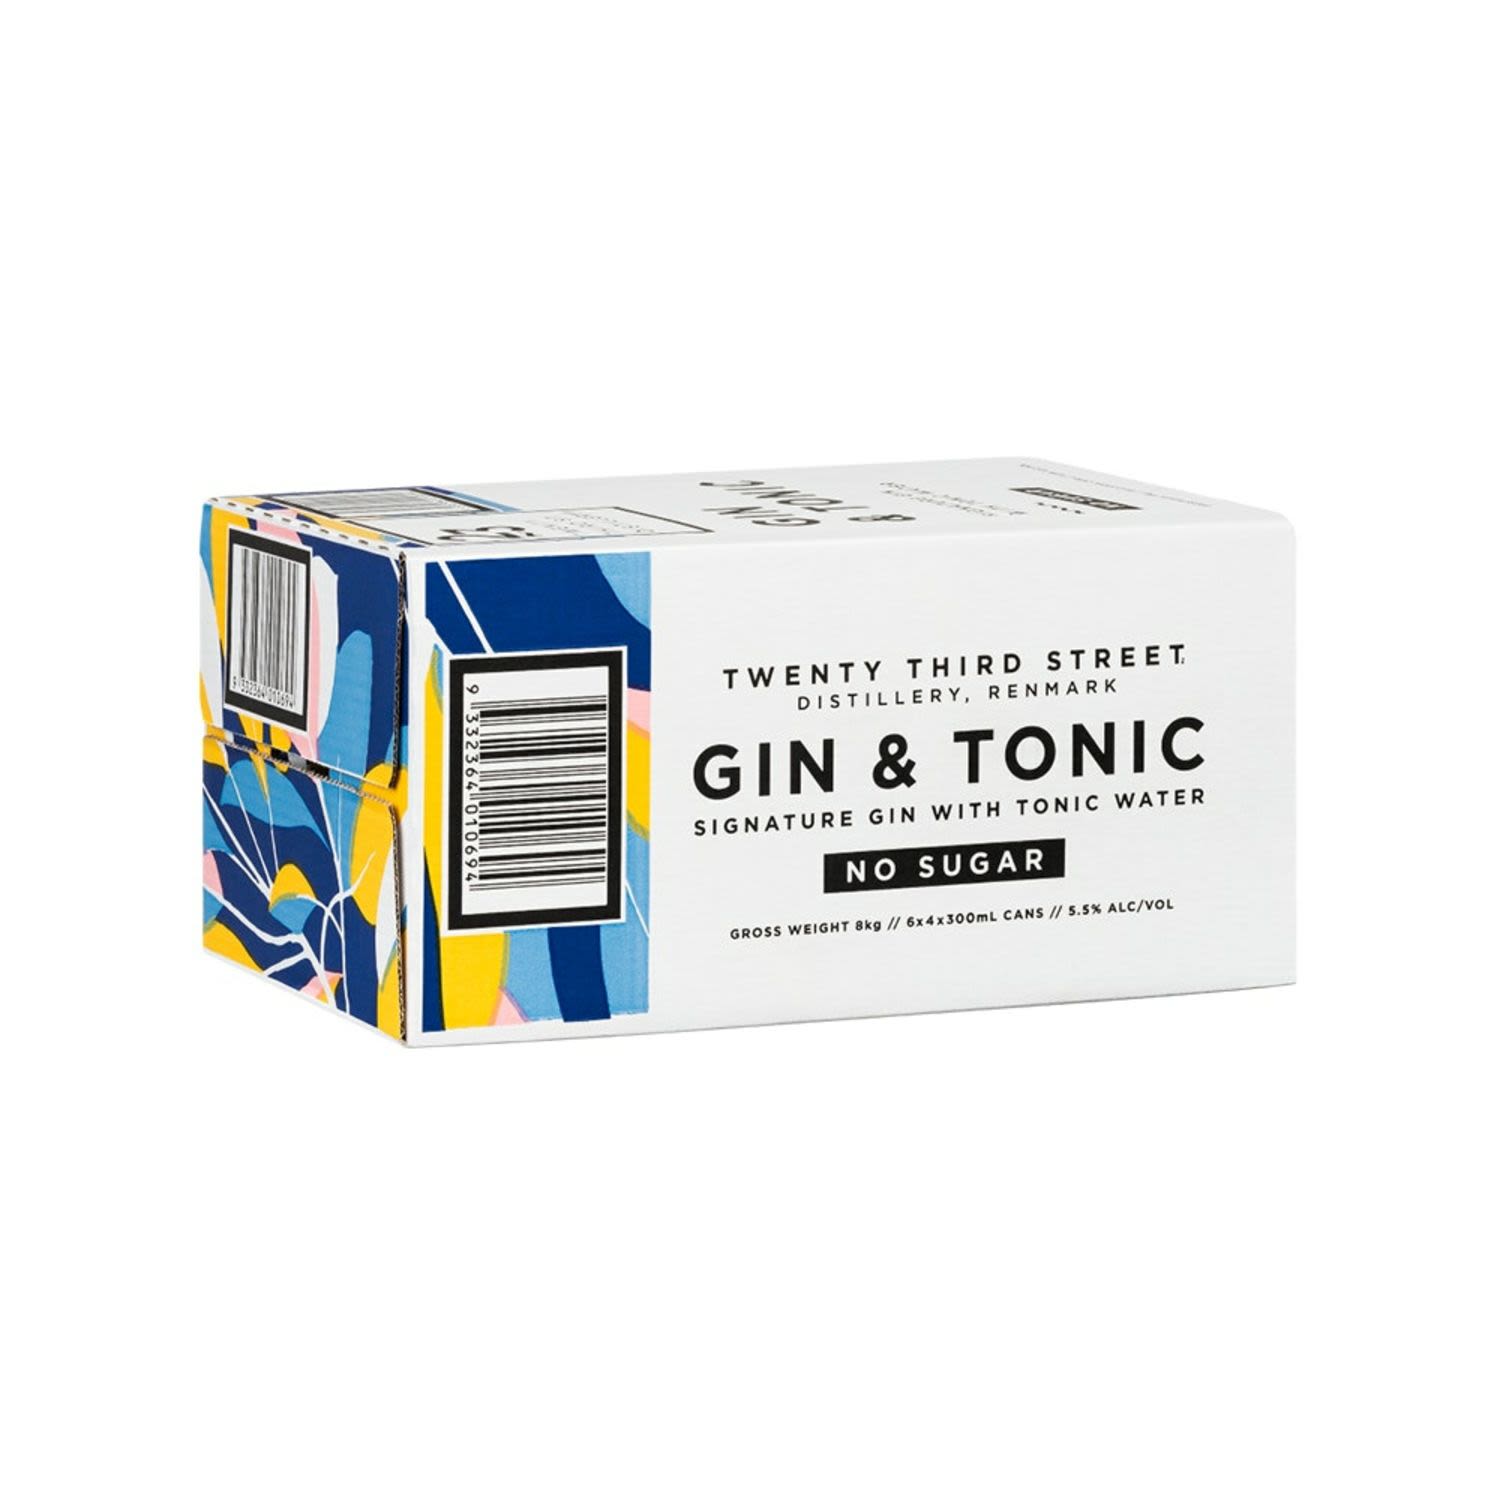 Vibrant, dimensional and sparkling. A tonic for the more demanding palate. Classic bitterness and a calculated hint of sweetness hum along with the Riverland citrus and aromatics of our Signature Gin.<br /> <br />Alcohol Volume: 5.50%<br /><br />Pack Format: 24 Pack<br /><br />Standard Drinks: 1.3</br /><br />Pack Type: Can<br />